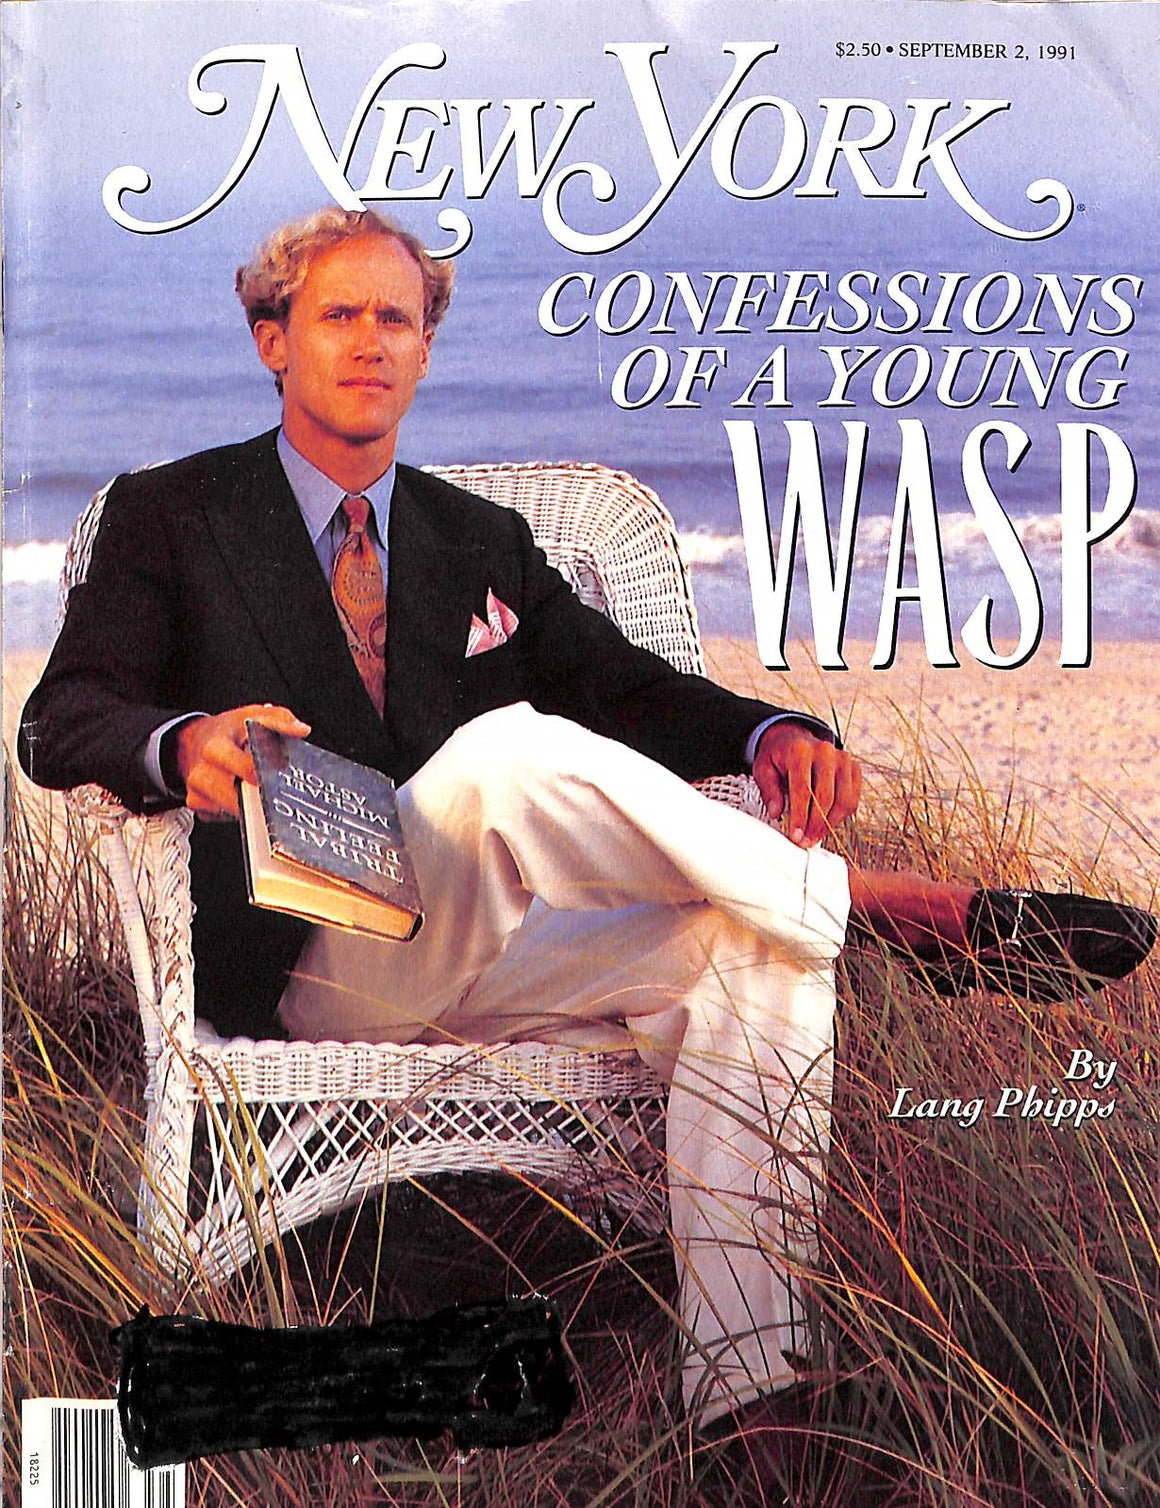 "Confessions Of A Young Wasp" PHIPPS, Lang New York Magazine September 2, 1991